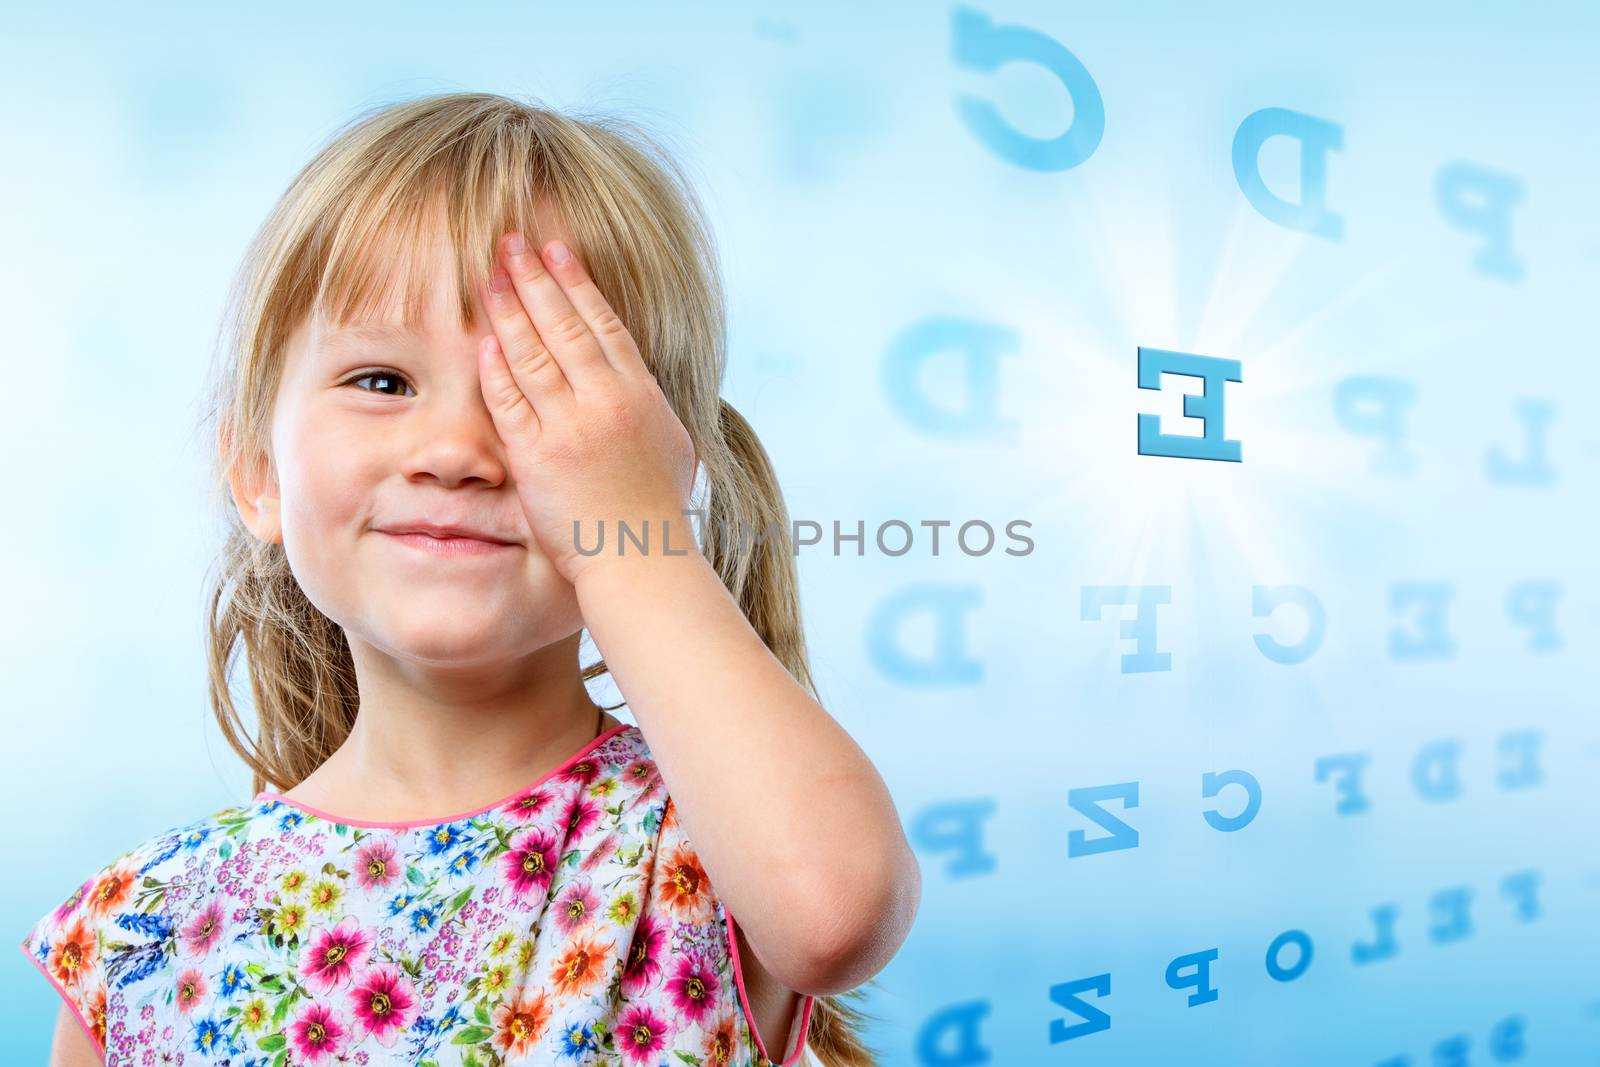 Close up portrait of little girl reading eye chart. Young kid testing one eye on block letter vision chart.